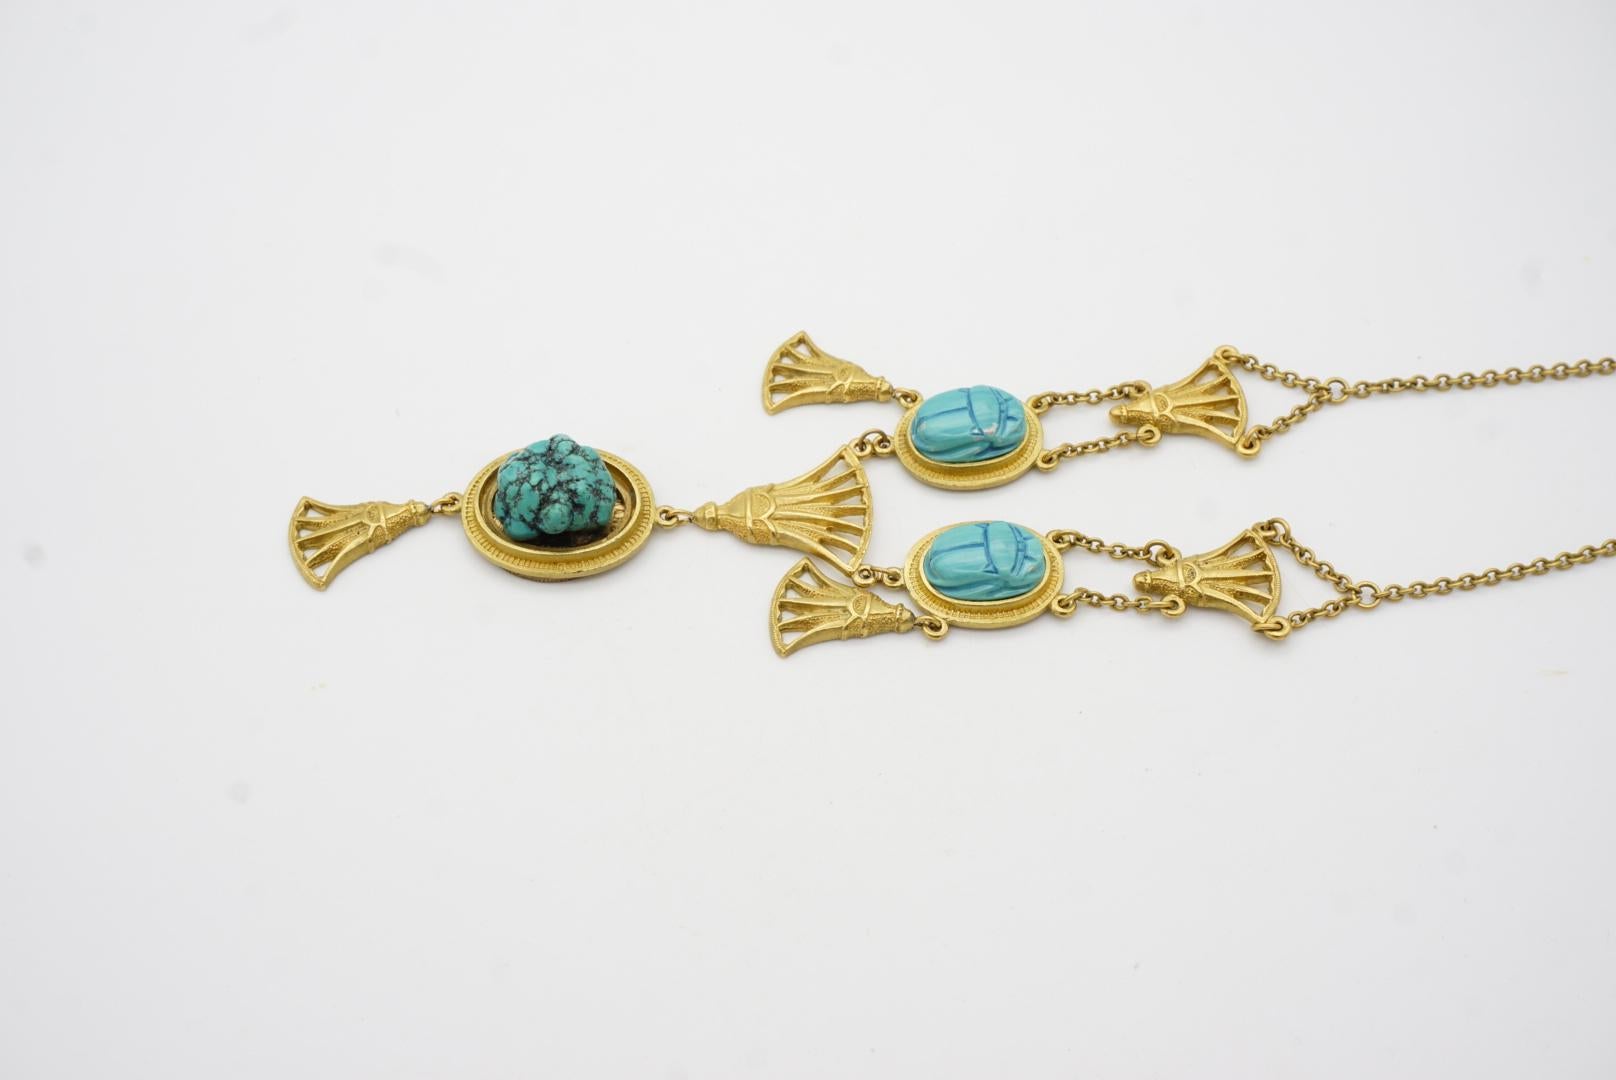 CHRISTIAN DIOR by John Galliano 2004 Egyptian Revival Turquoise Scarab Necklace For Sale 6